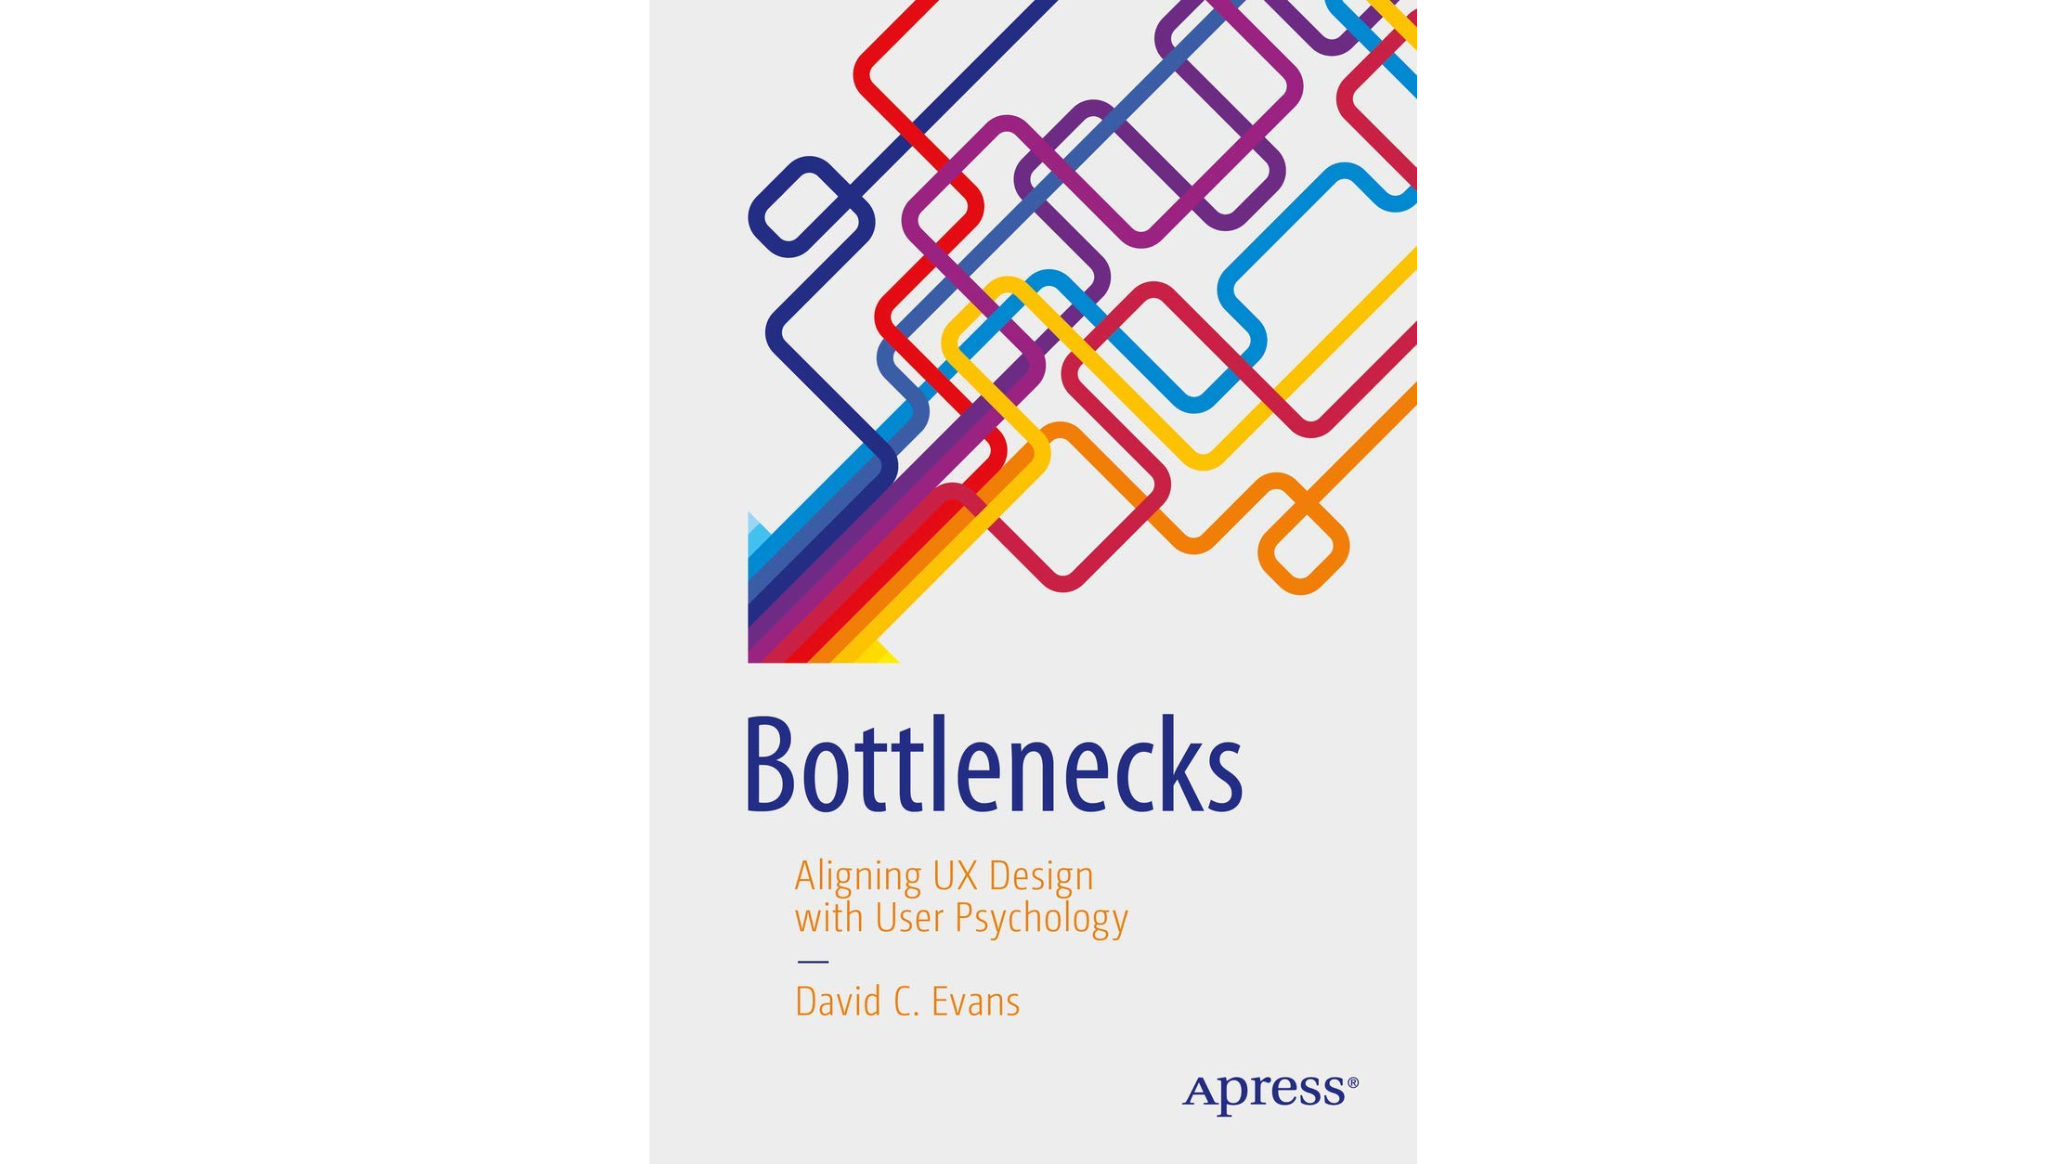 Book cover with tangled colorful lines graphic